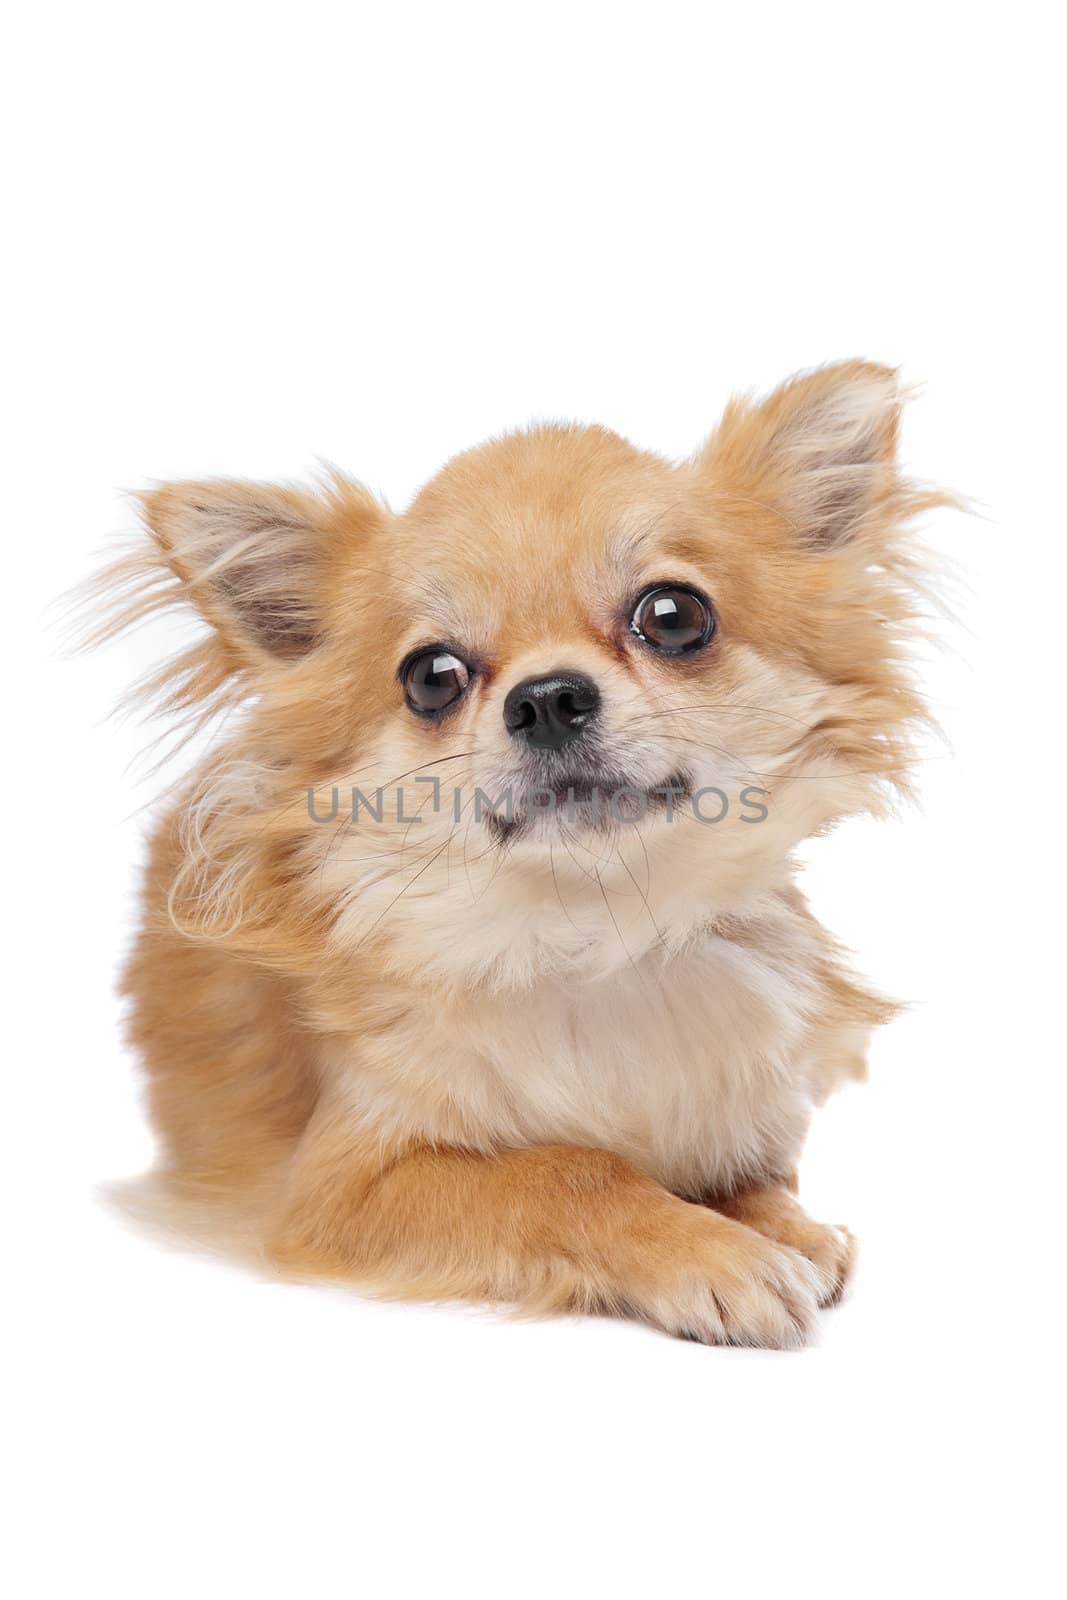 Brown long haired chihuahua by eriklam